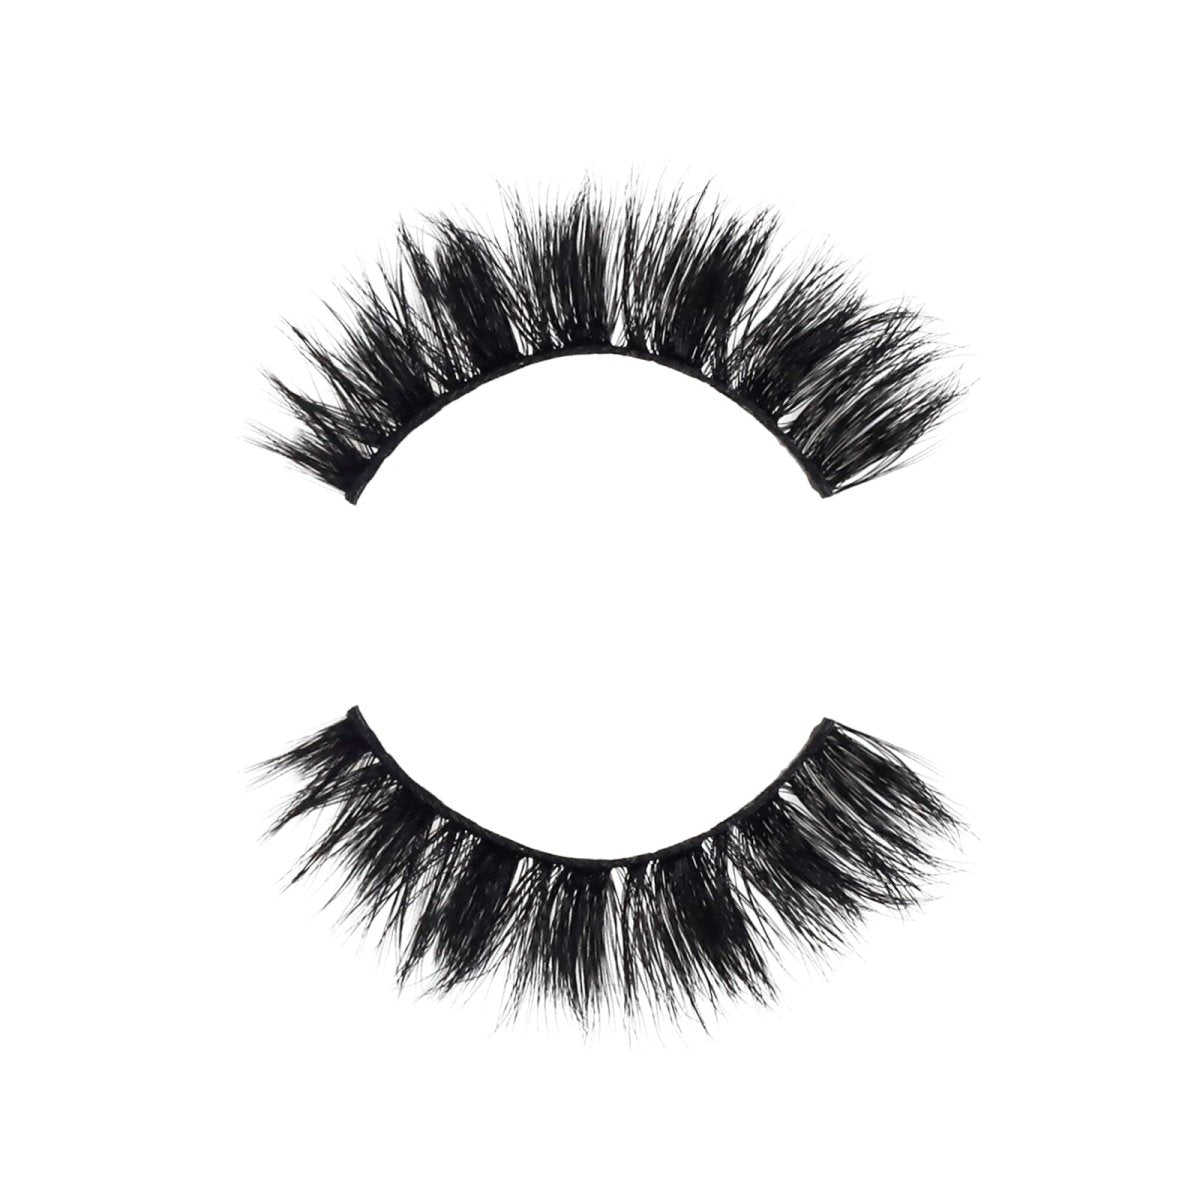 Be Witchin' Strip Lashes - Lola's Lashes